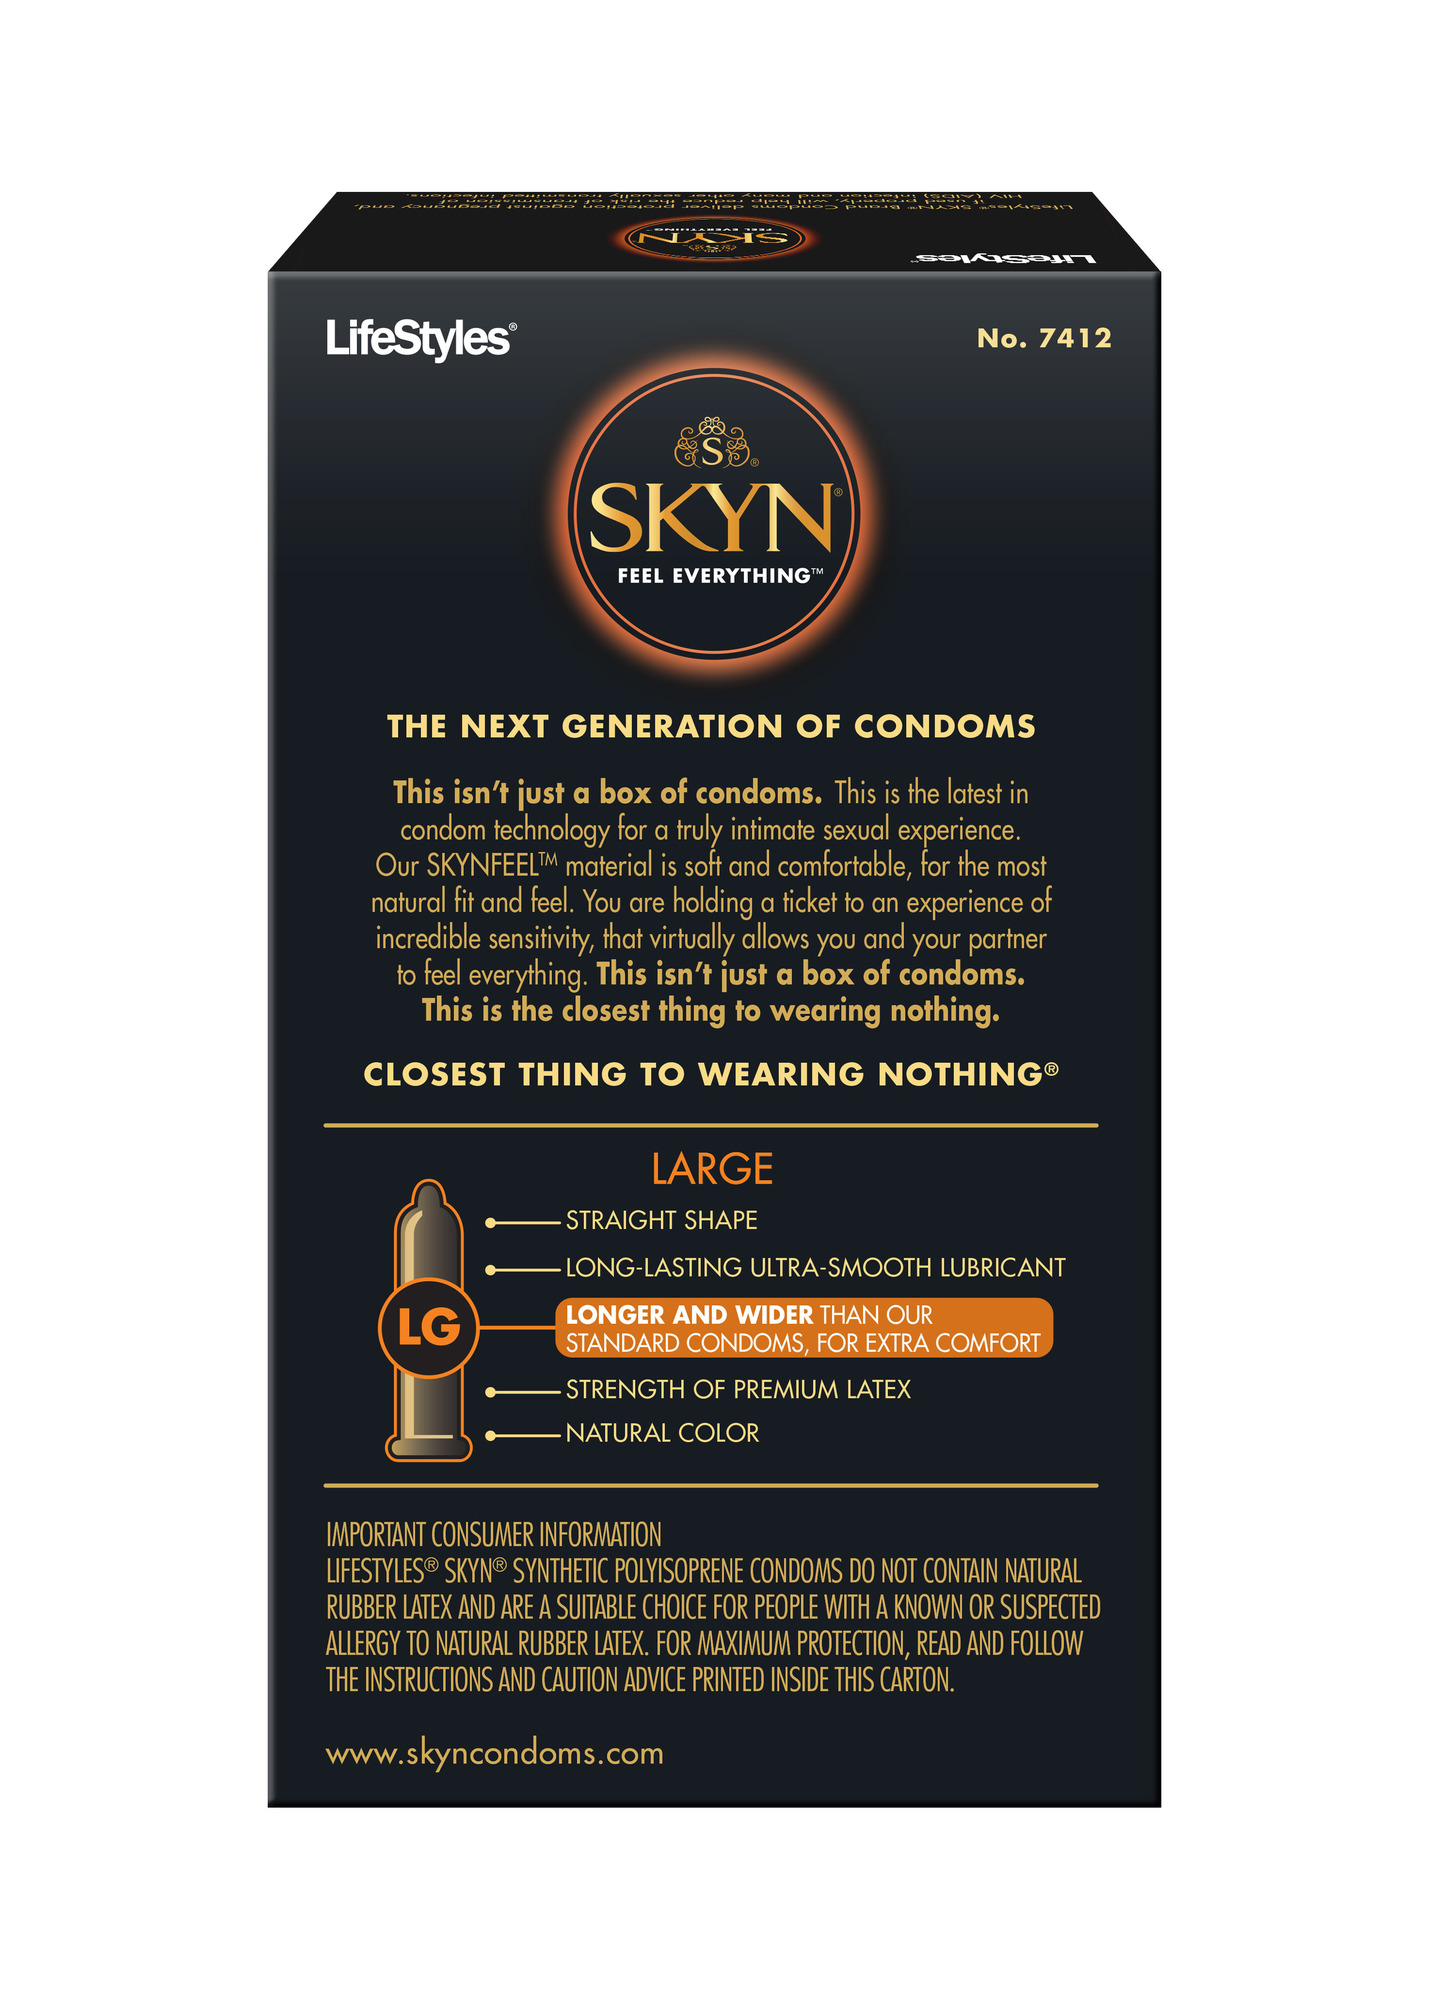 Lifestyles skyn elite condoms are 20% thinner compared to the lifestyles sk...